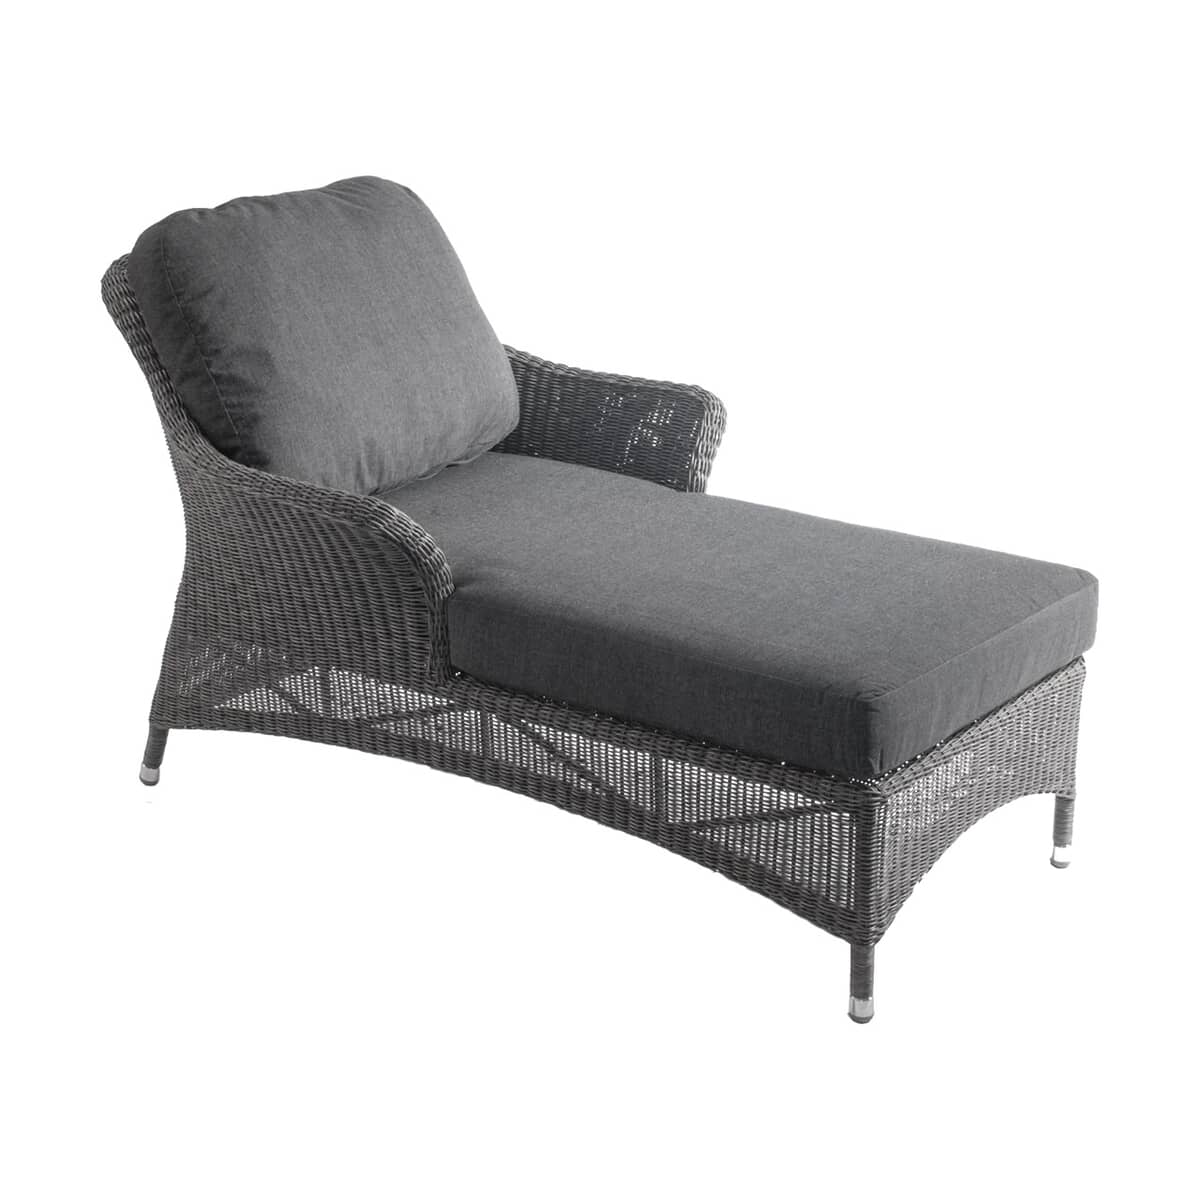 Alexander Rose Monte Carlo Relax Lounger with Cushion